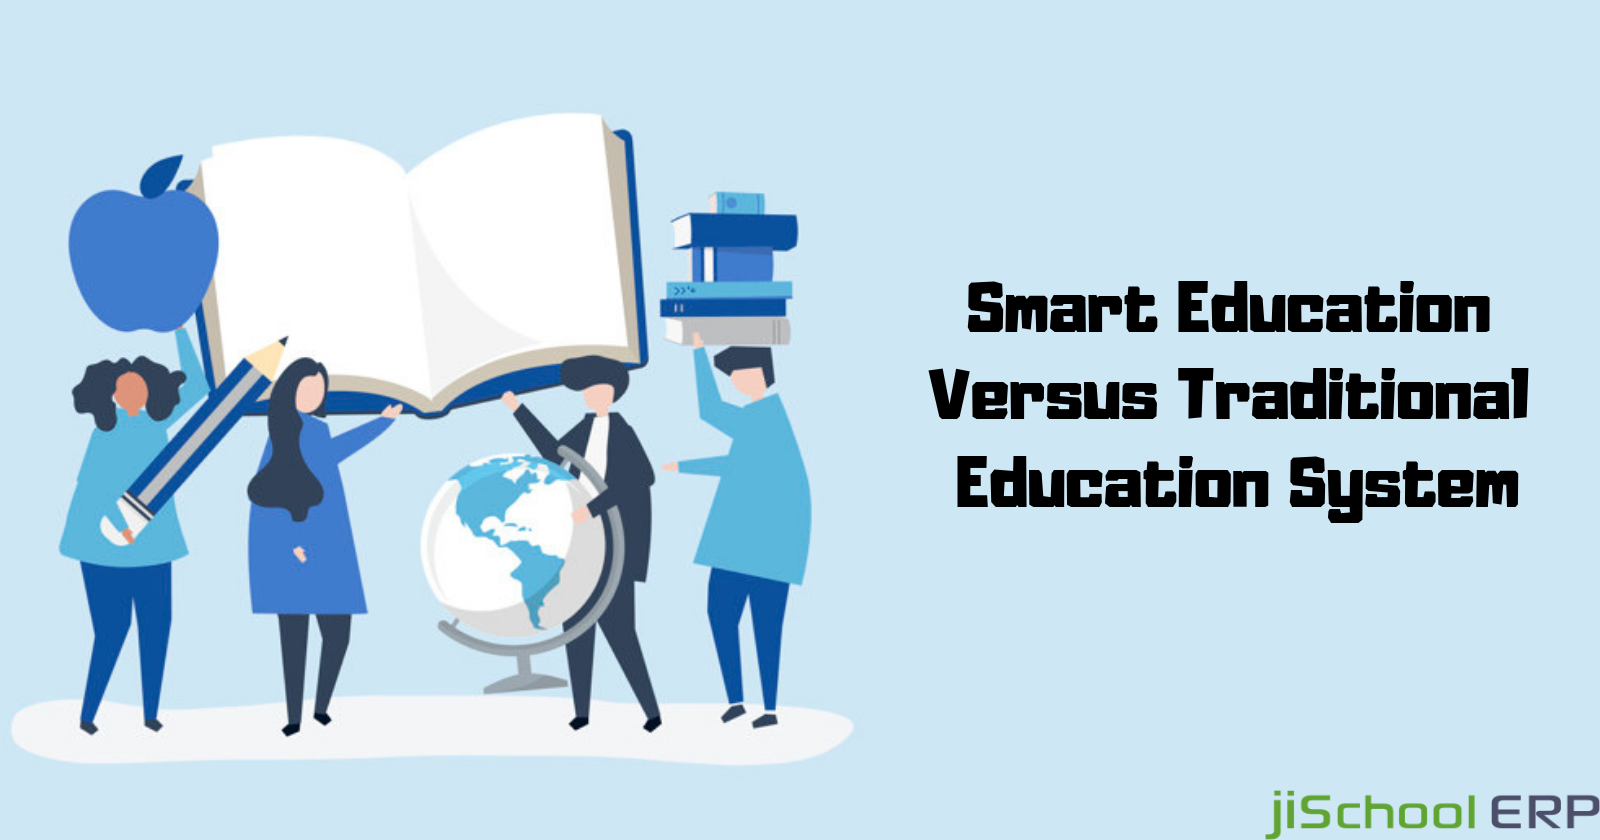 Smart Education Versus Traditional Education System